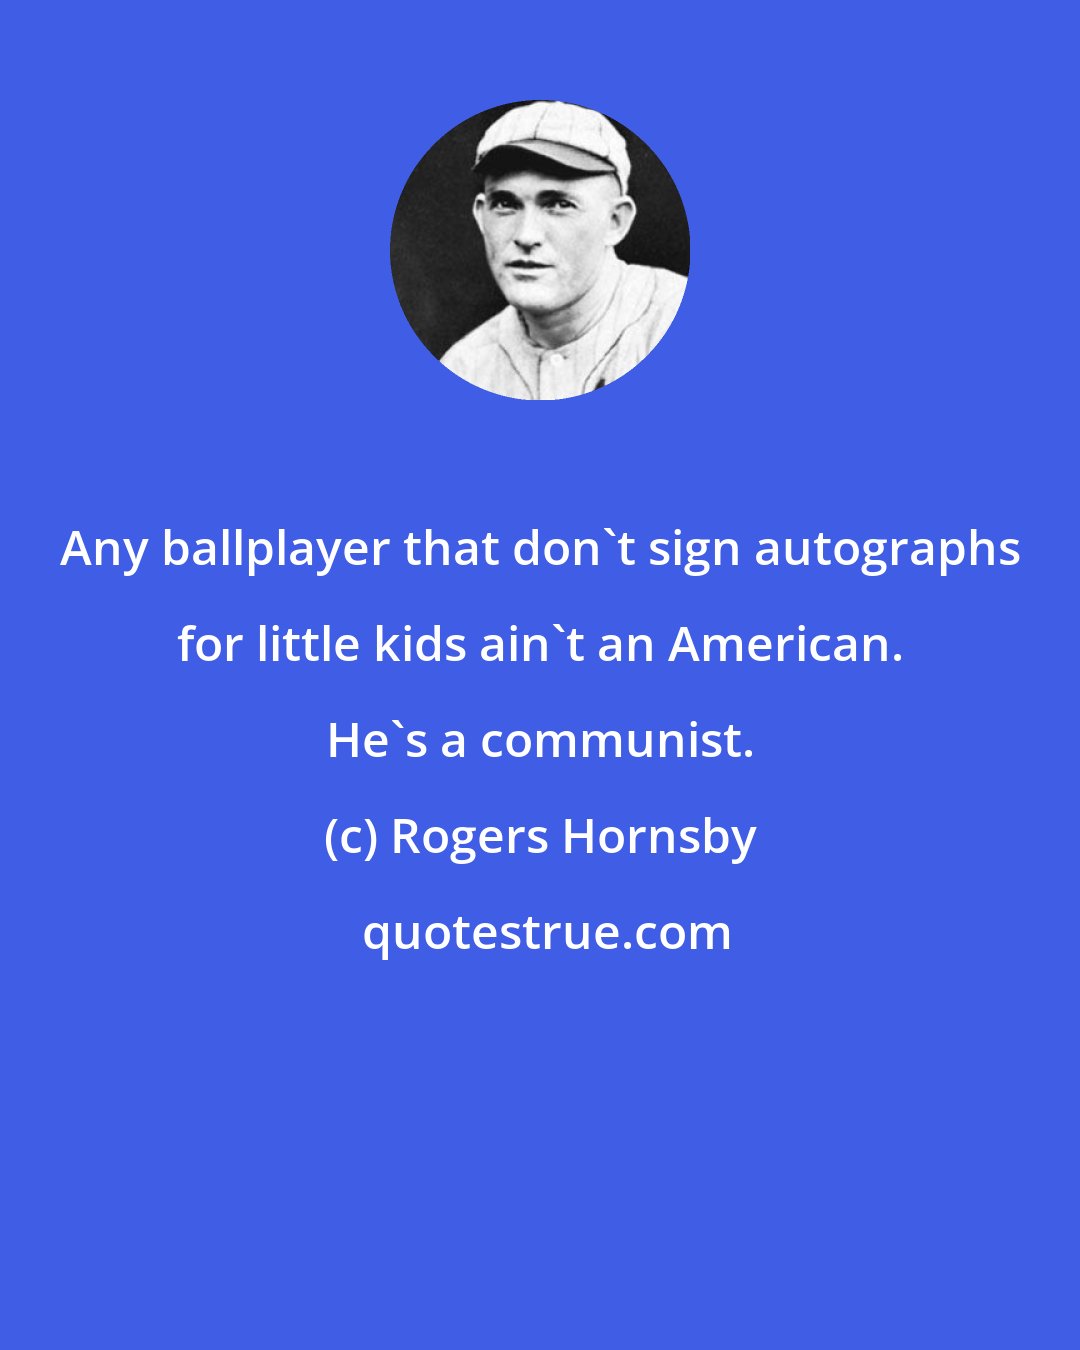 Rogers Hornsby: Any ballplayer that don't sign autographs for little kids ain't an American. He's a communist.